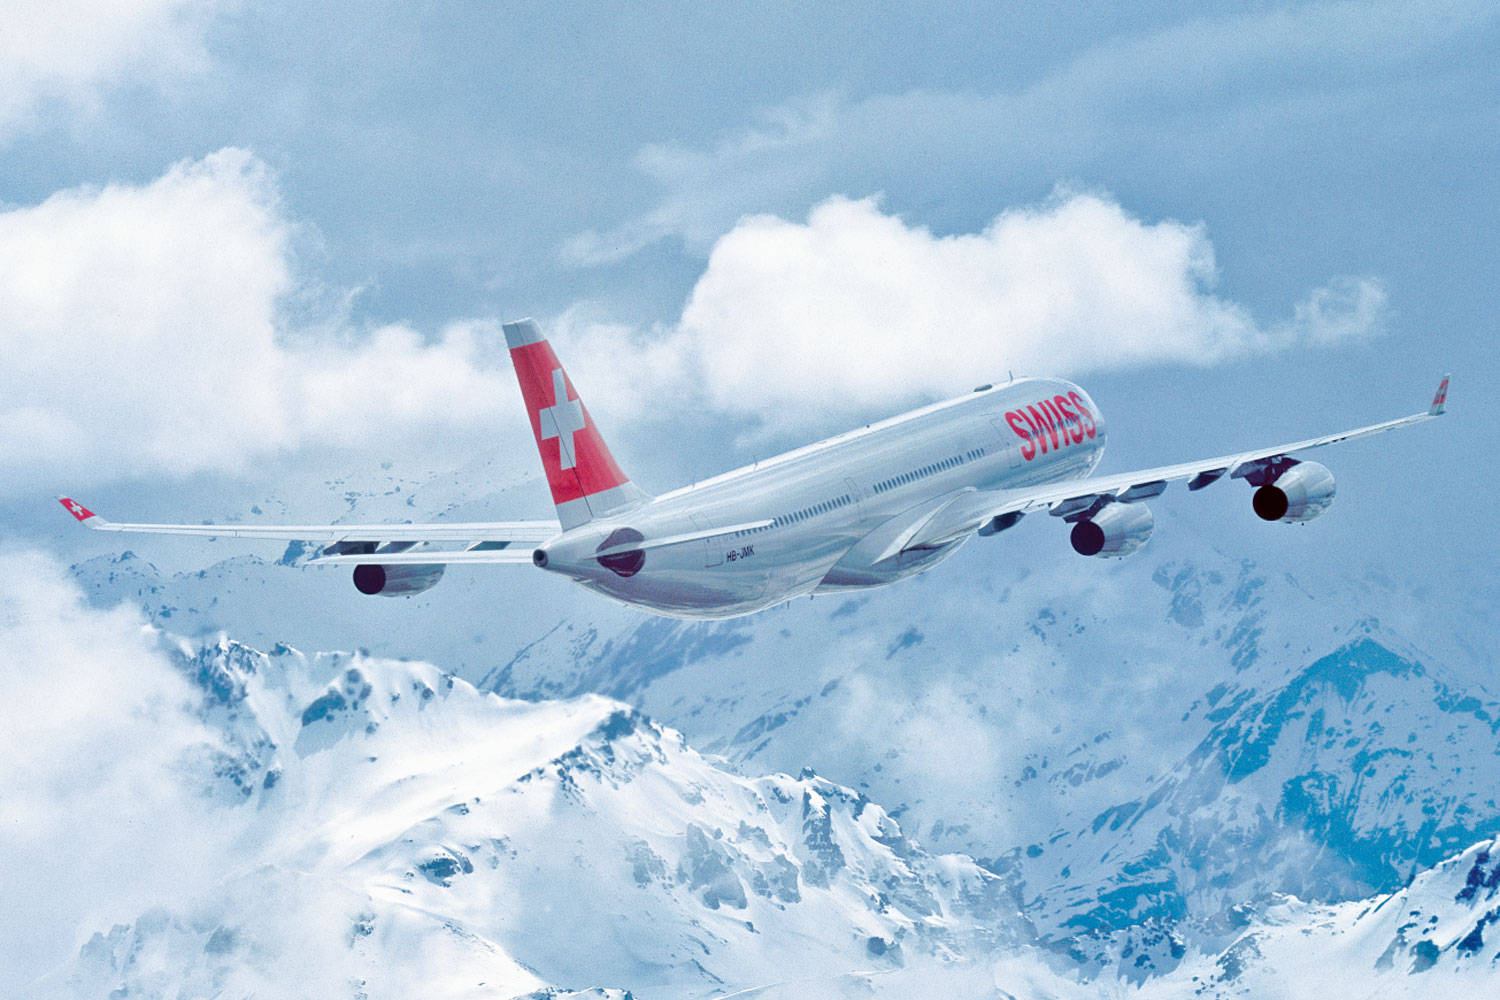 Swiss Airlines Airplane On A Cloudy Mountain Background